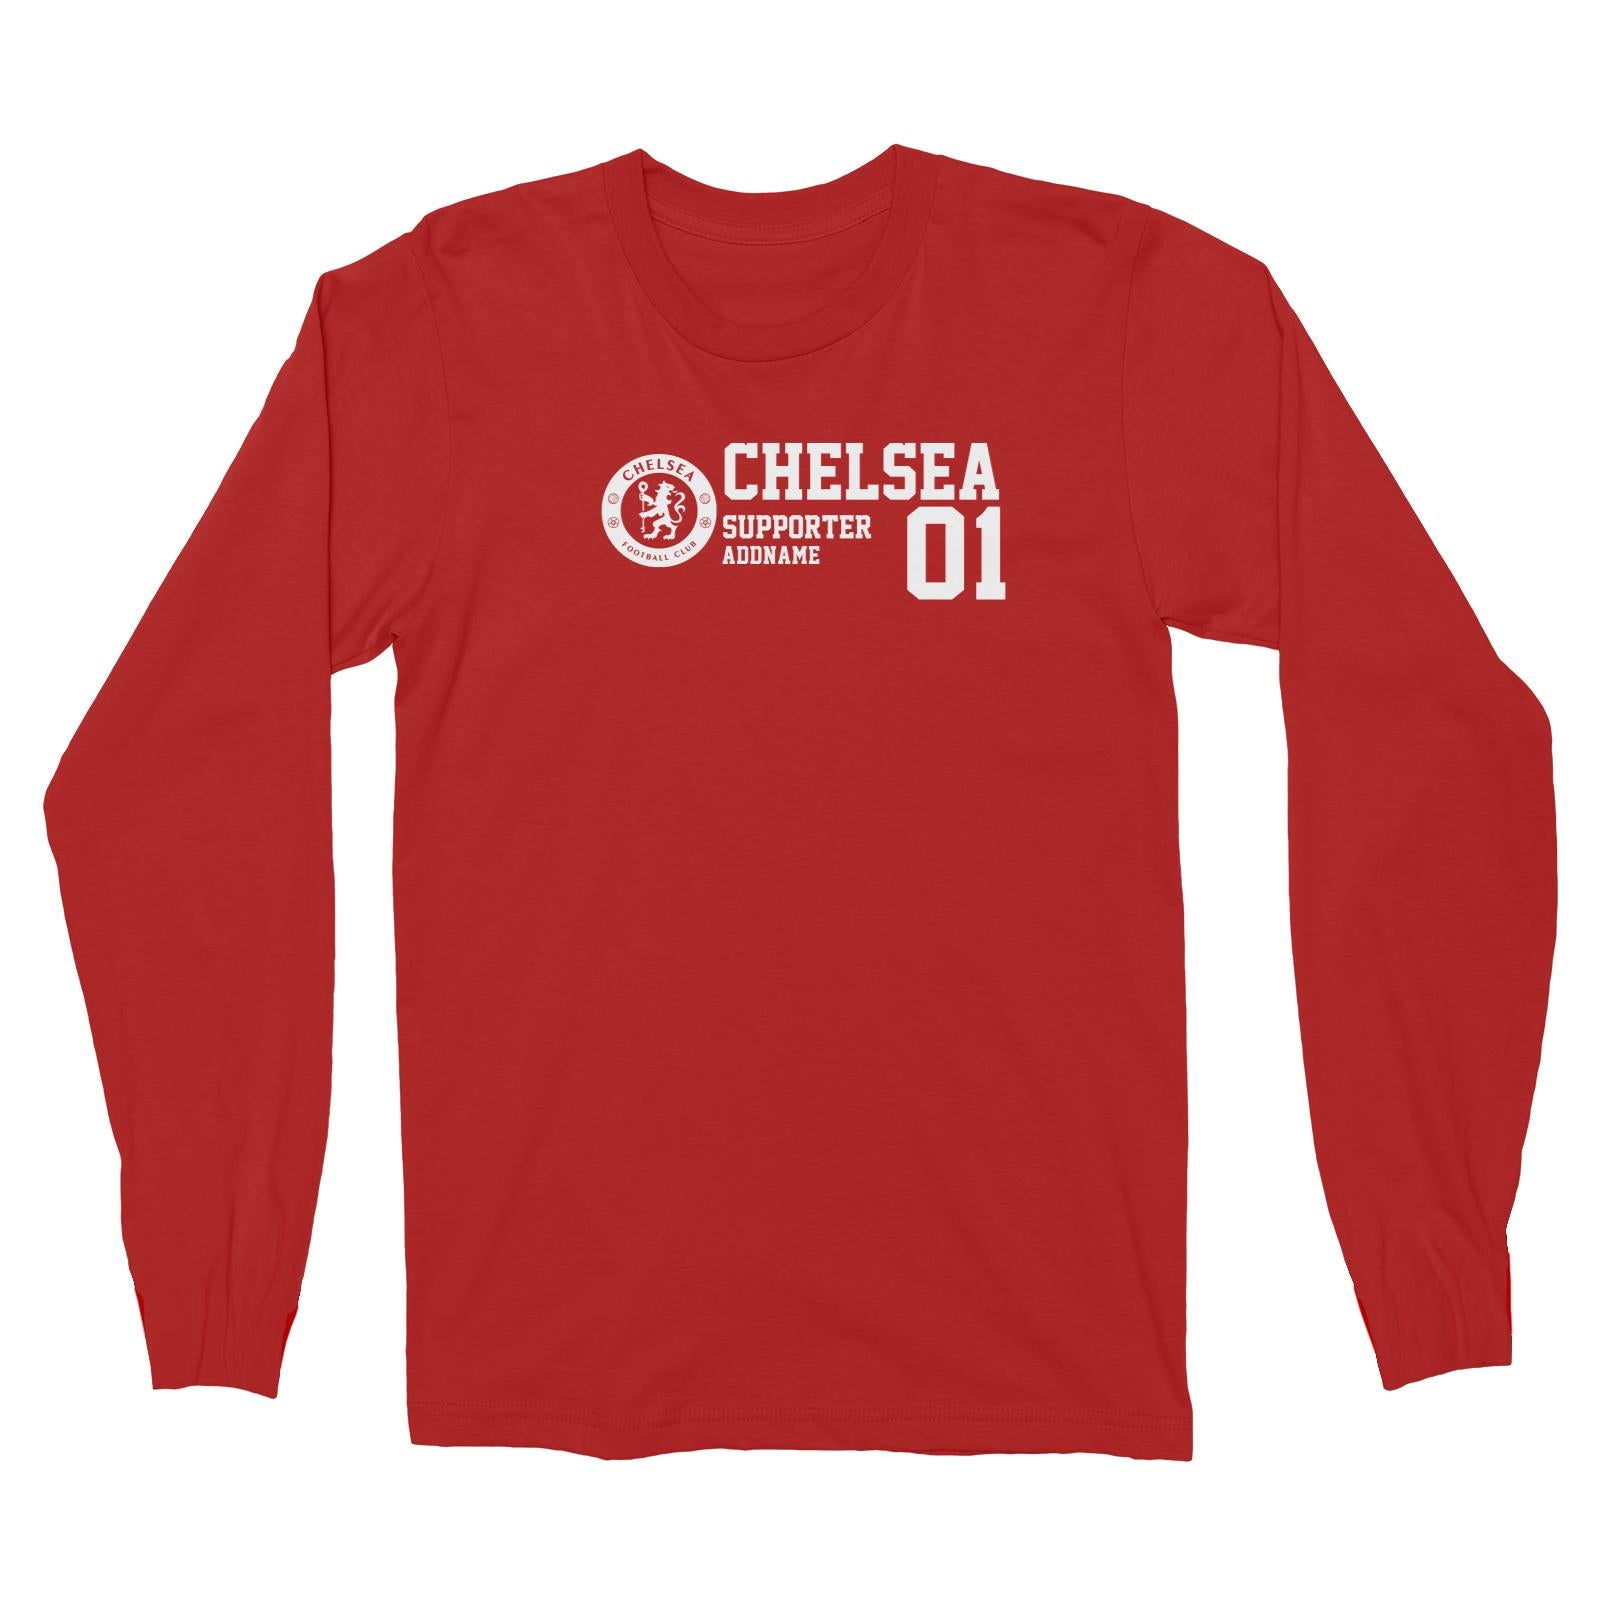 Chelsea Football Keep Supporter Addname Long Sleeve Unisex T-Shirt